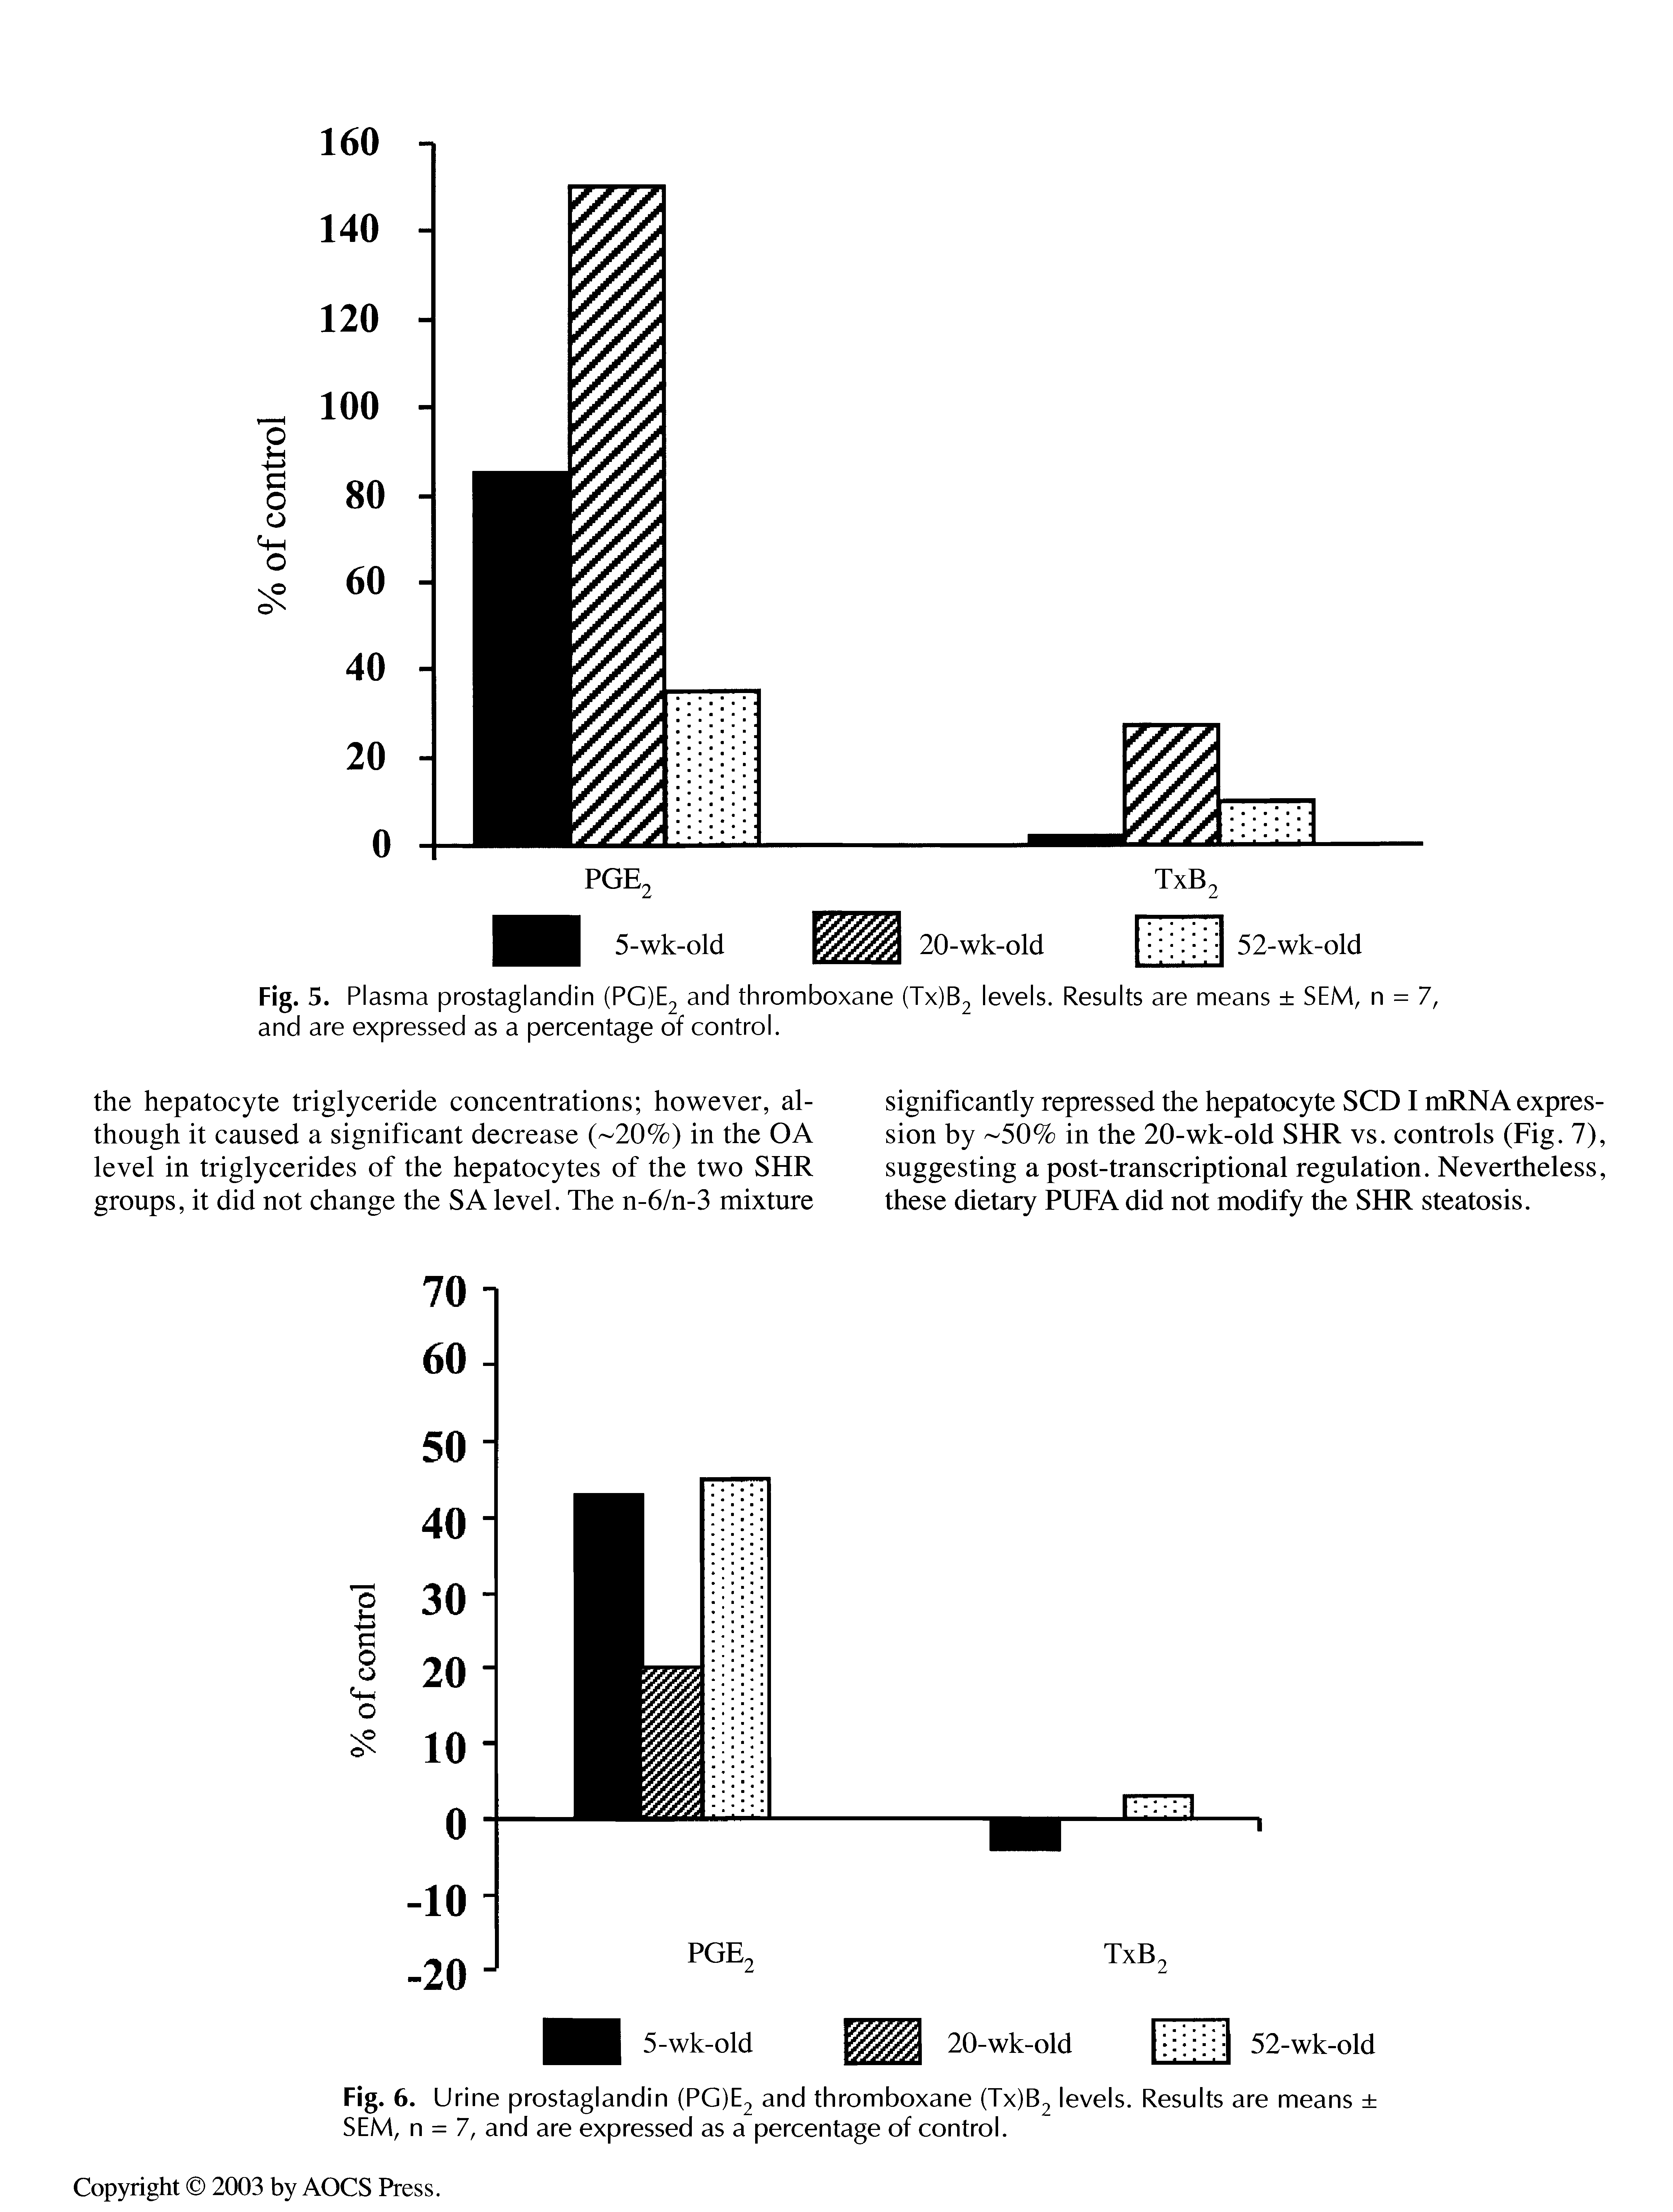 Fig. 6. Urine prostaglandin (PG)E2 and thromboxane (Tx)B2 levels. Results are means SEM, n = 7, and are expressed as a percentage of control.